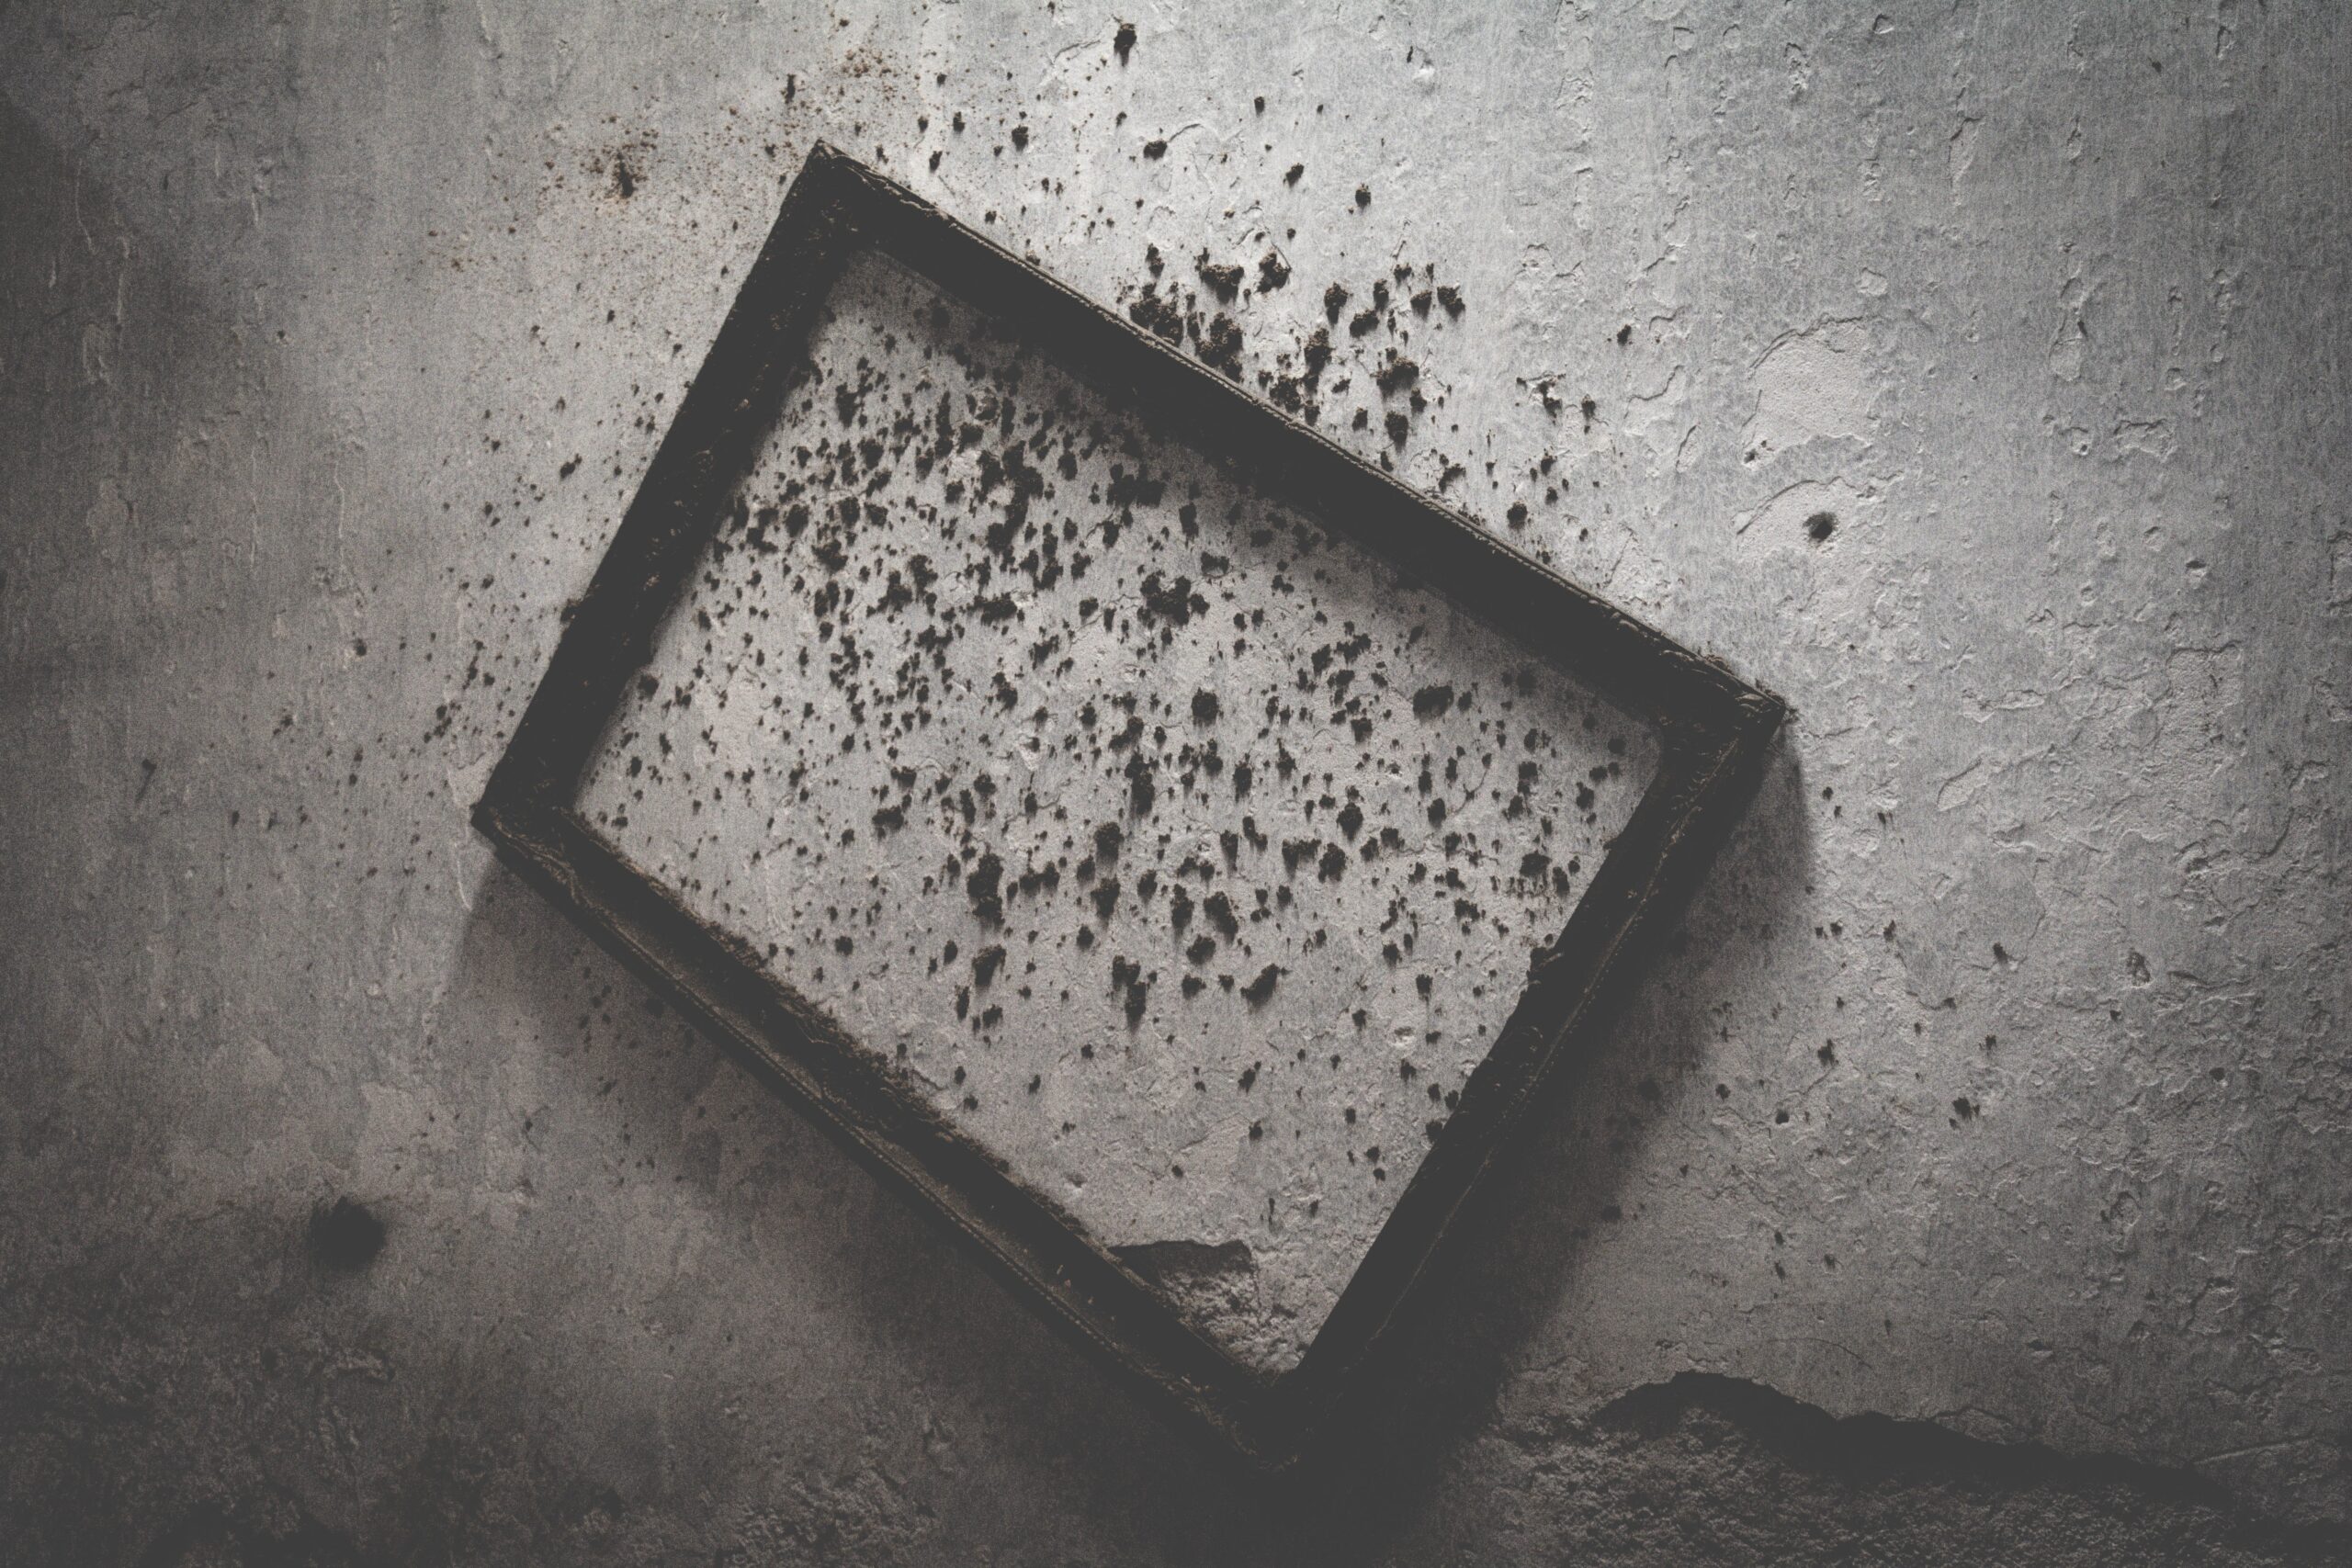 Mold caused by water damage can grow in as little as 24 hours after exposure.